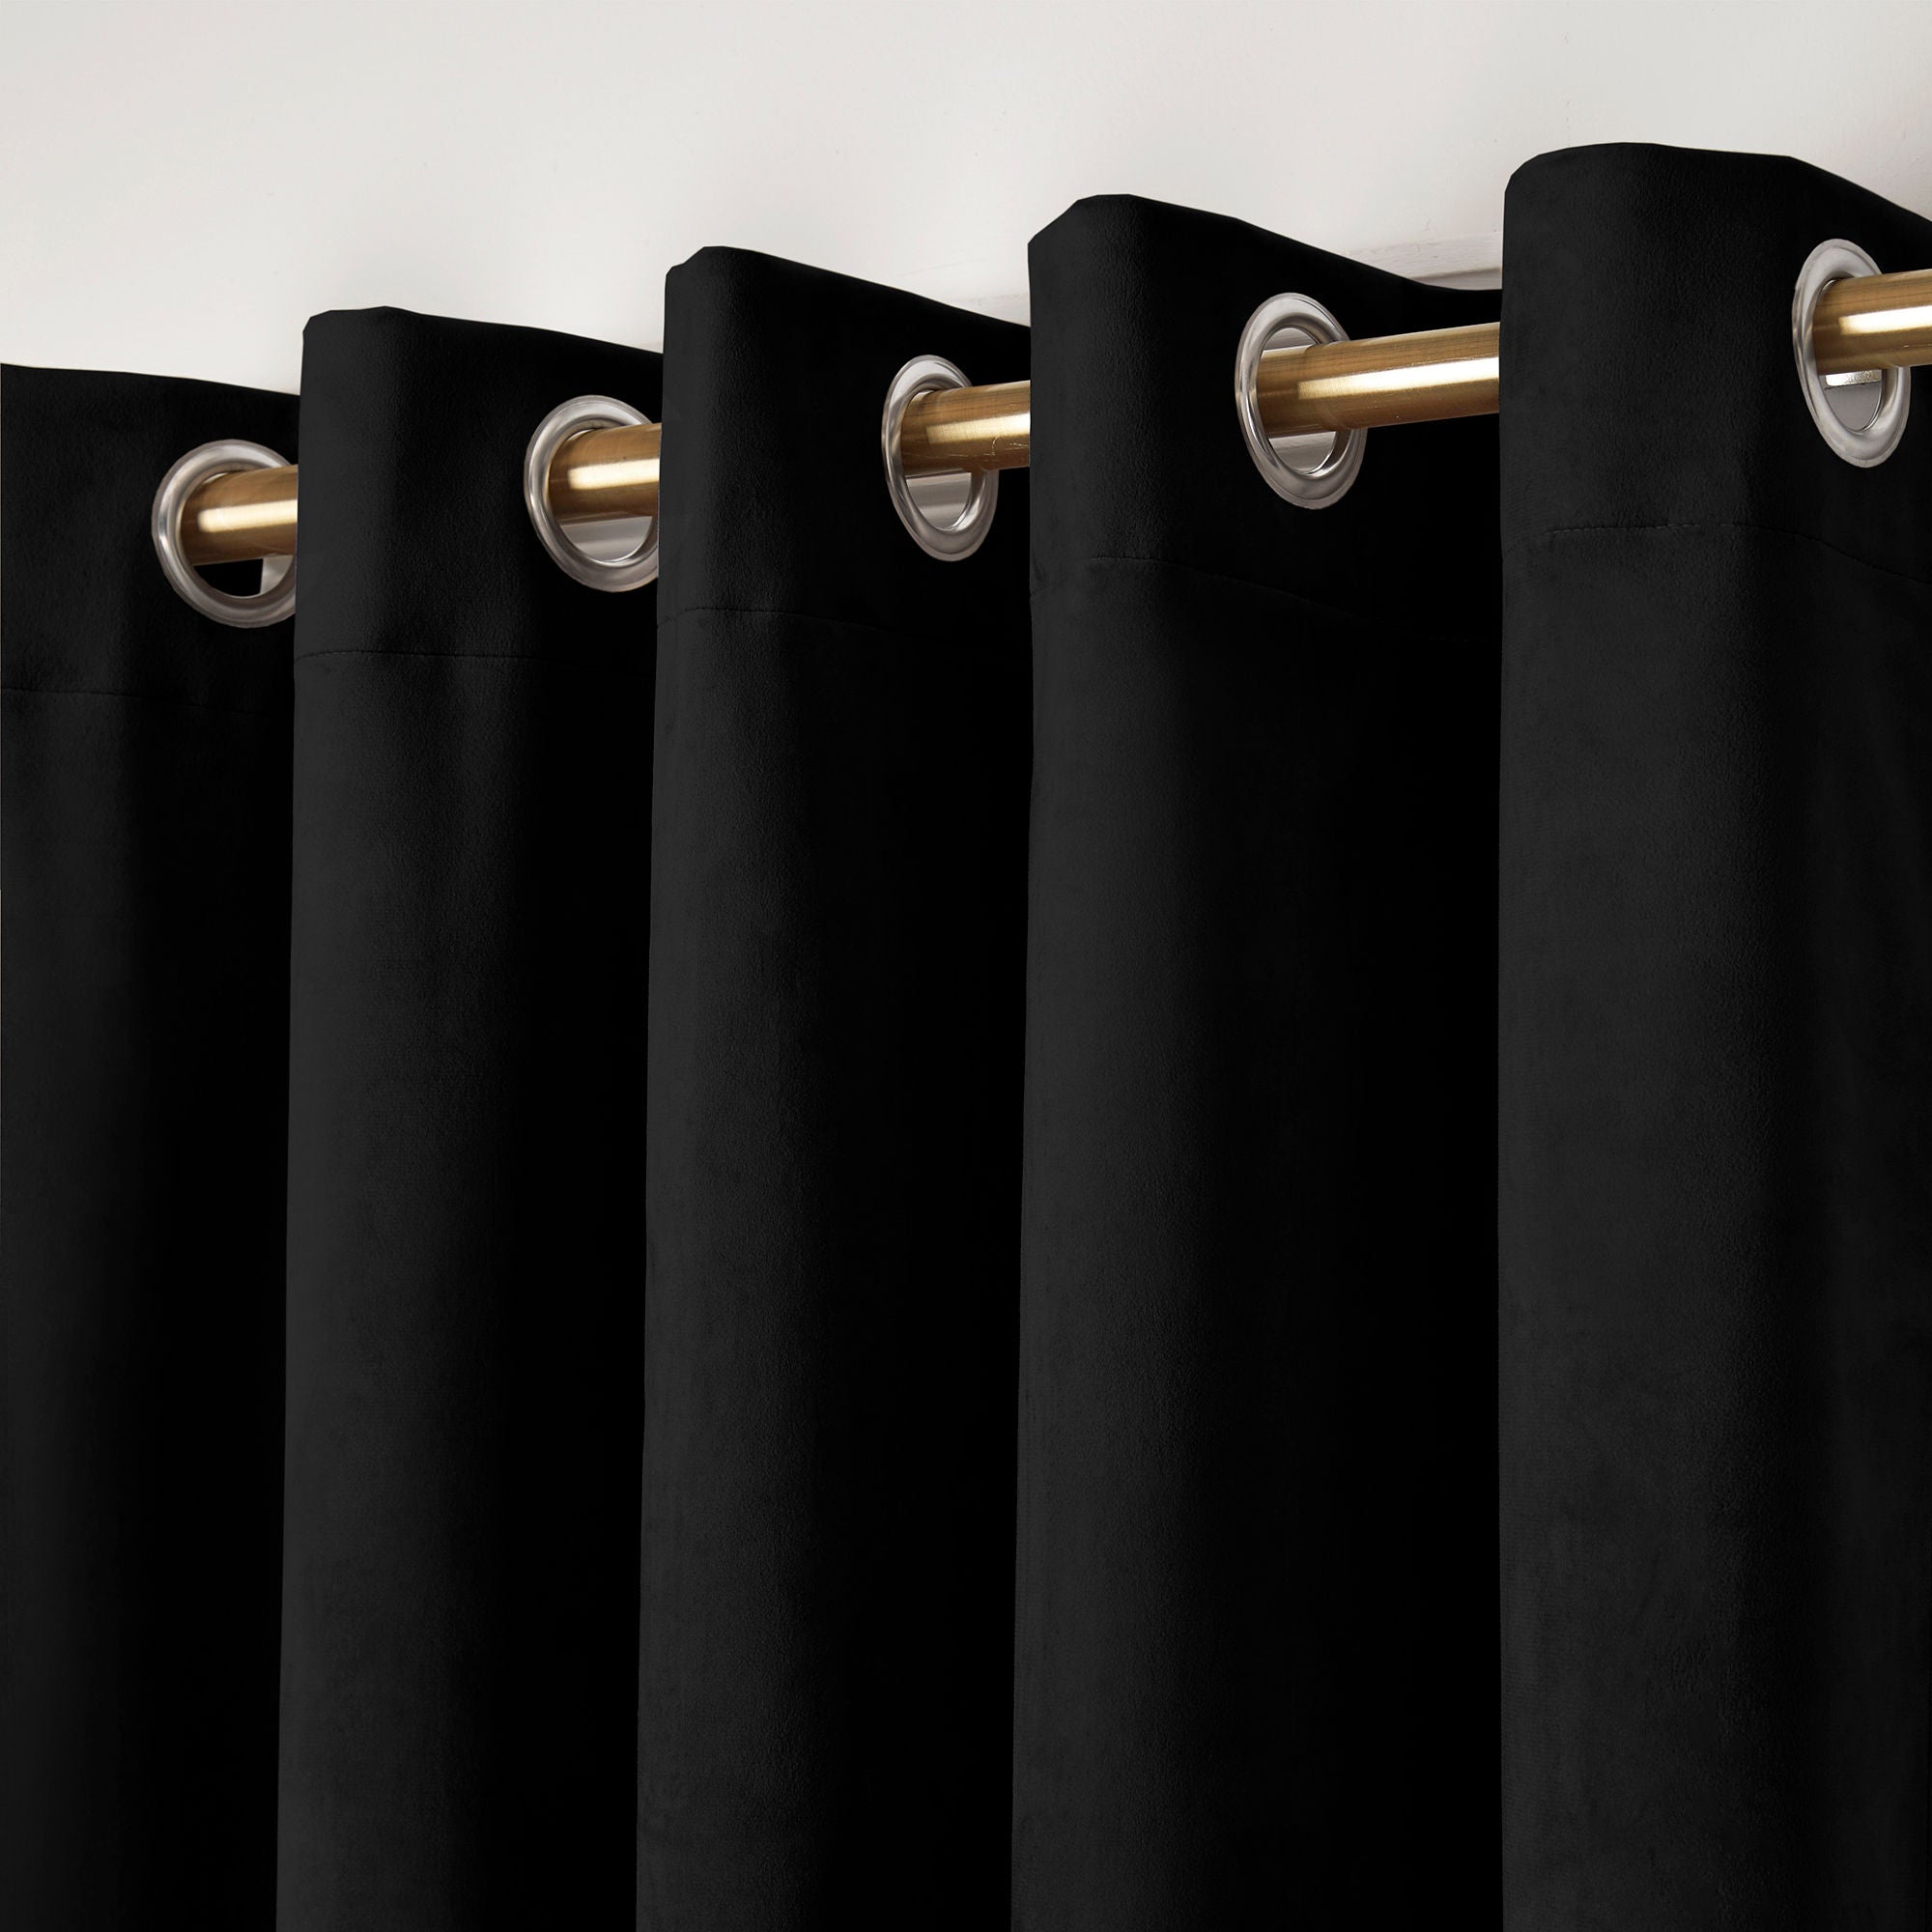 Montrose Pair of Eyelet Curtains by Laurence Llewelyn-Bowen in Black - Pair of Eyelet Curtains - Laurence Llewelyn-Bowen